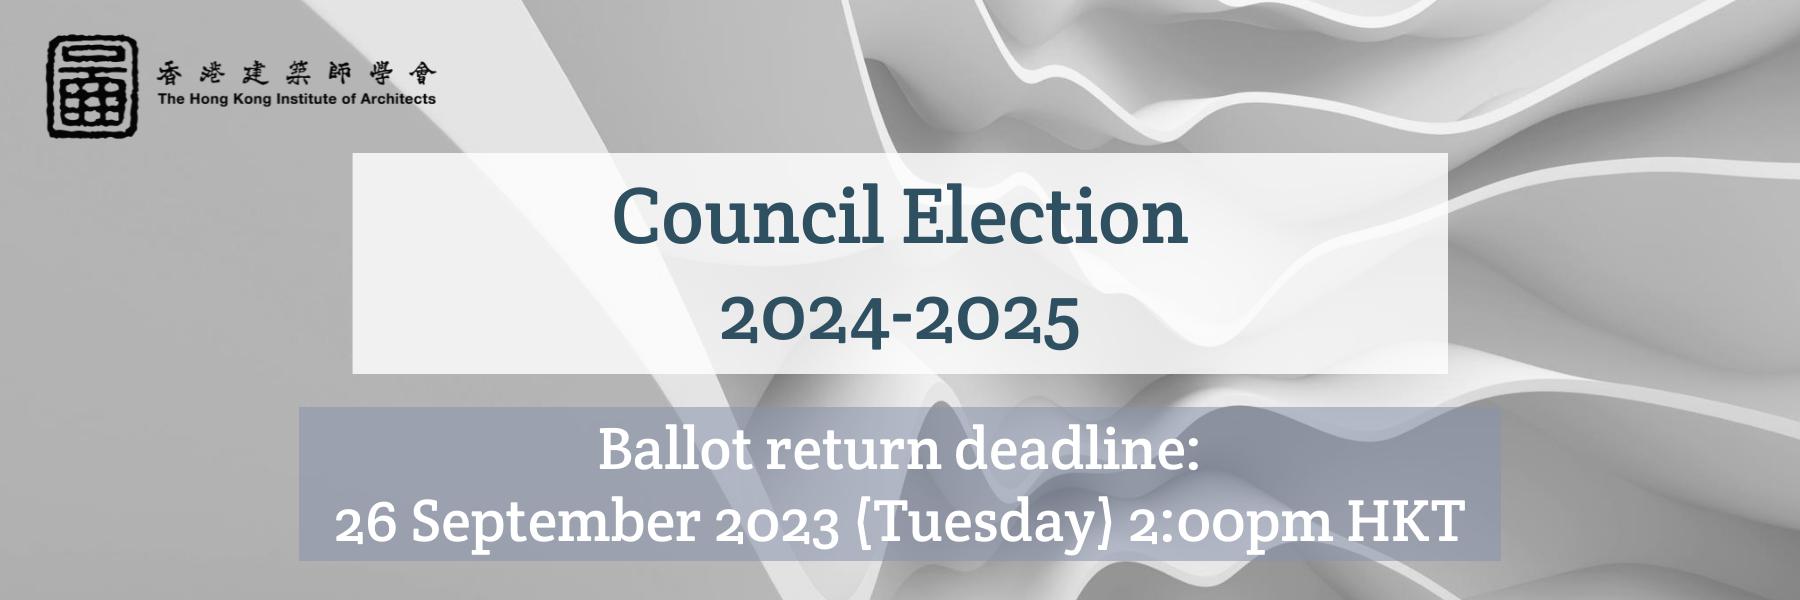 Council Election for 2024-2025: Voting Package is on the way to you!